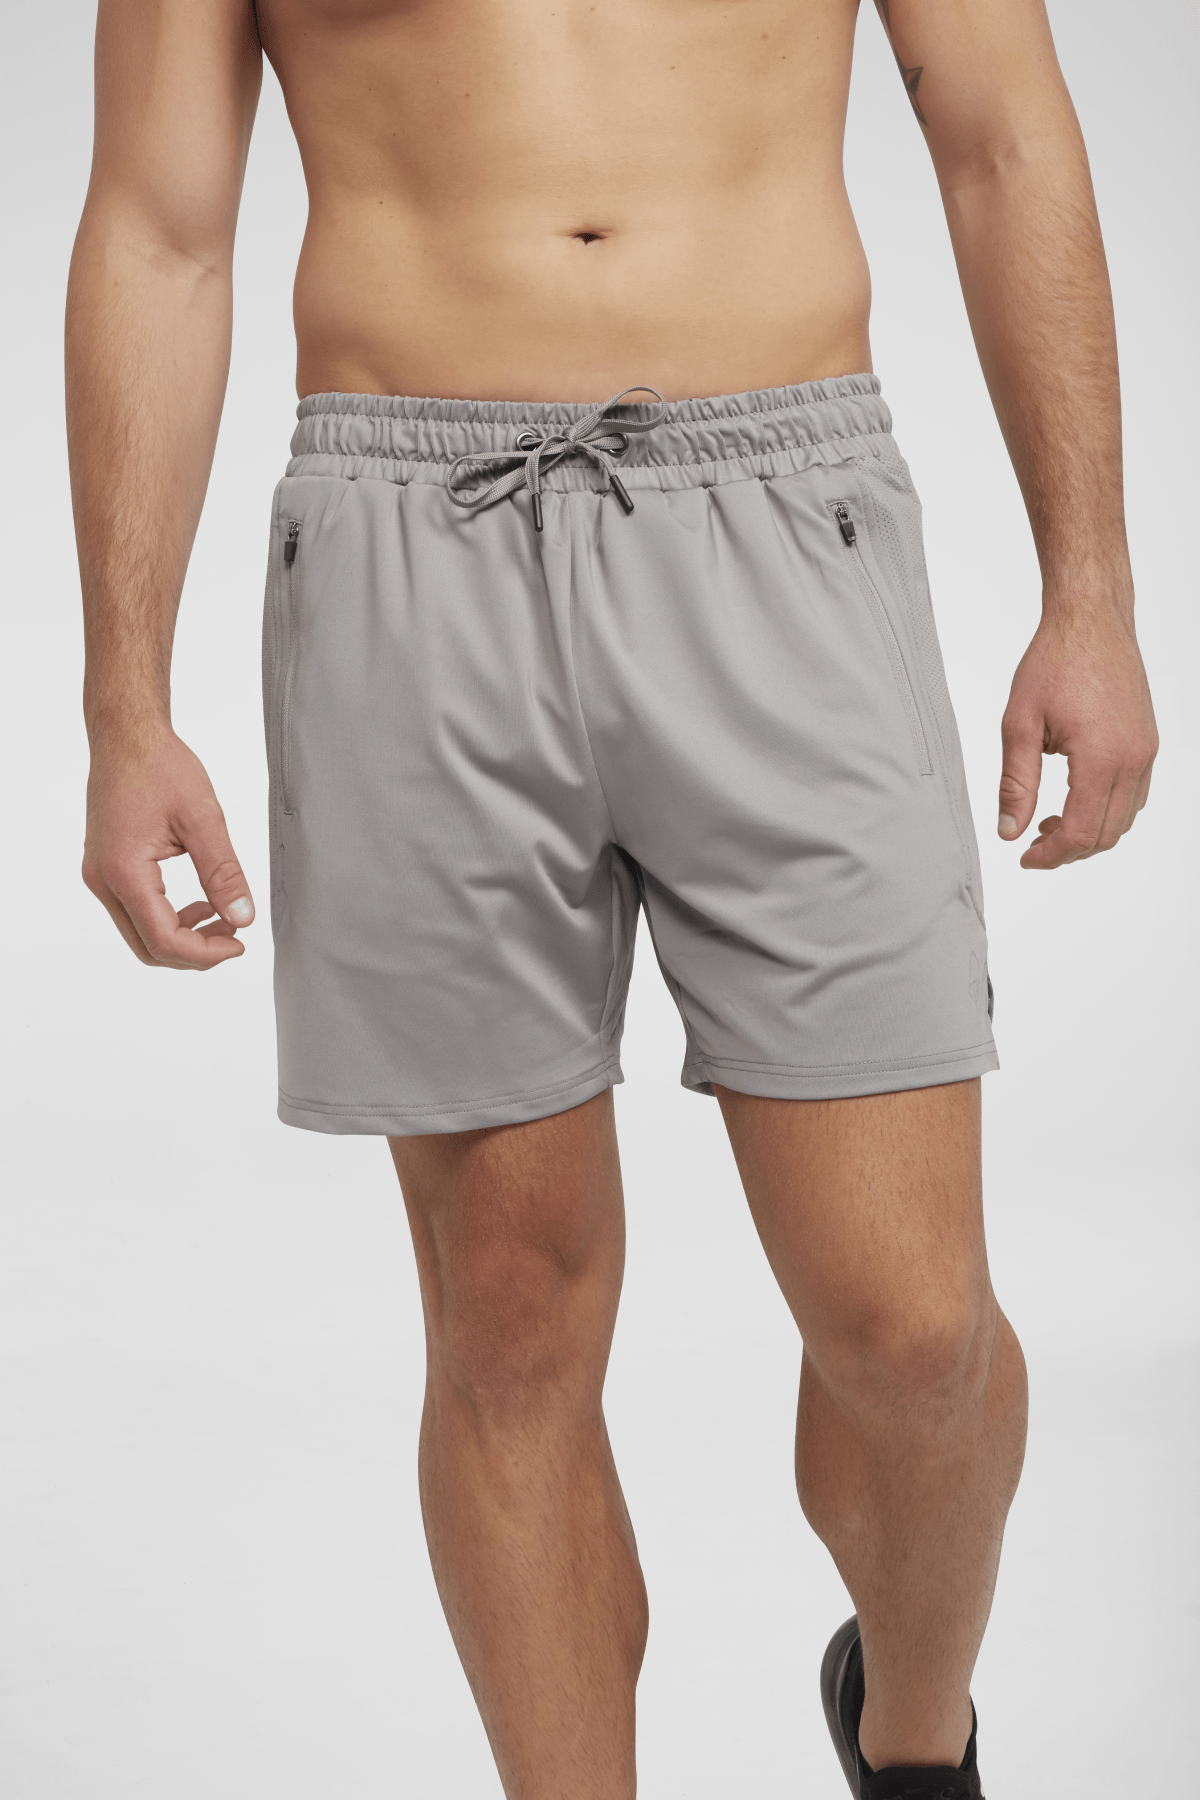 Newtype Official Shorts Intricate Shorts - Grey